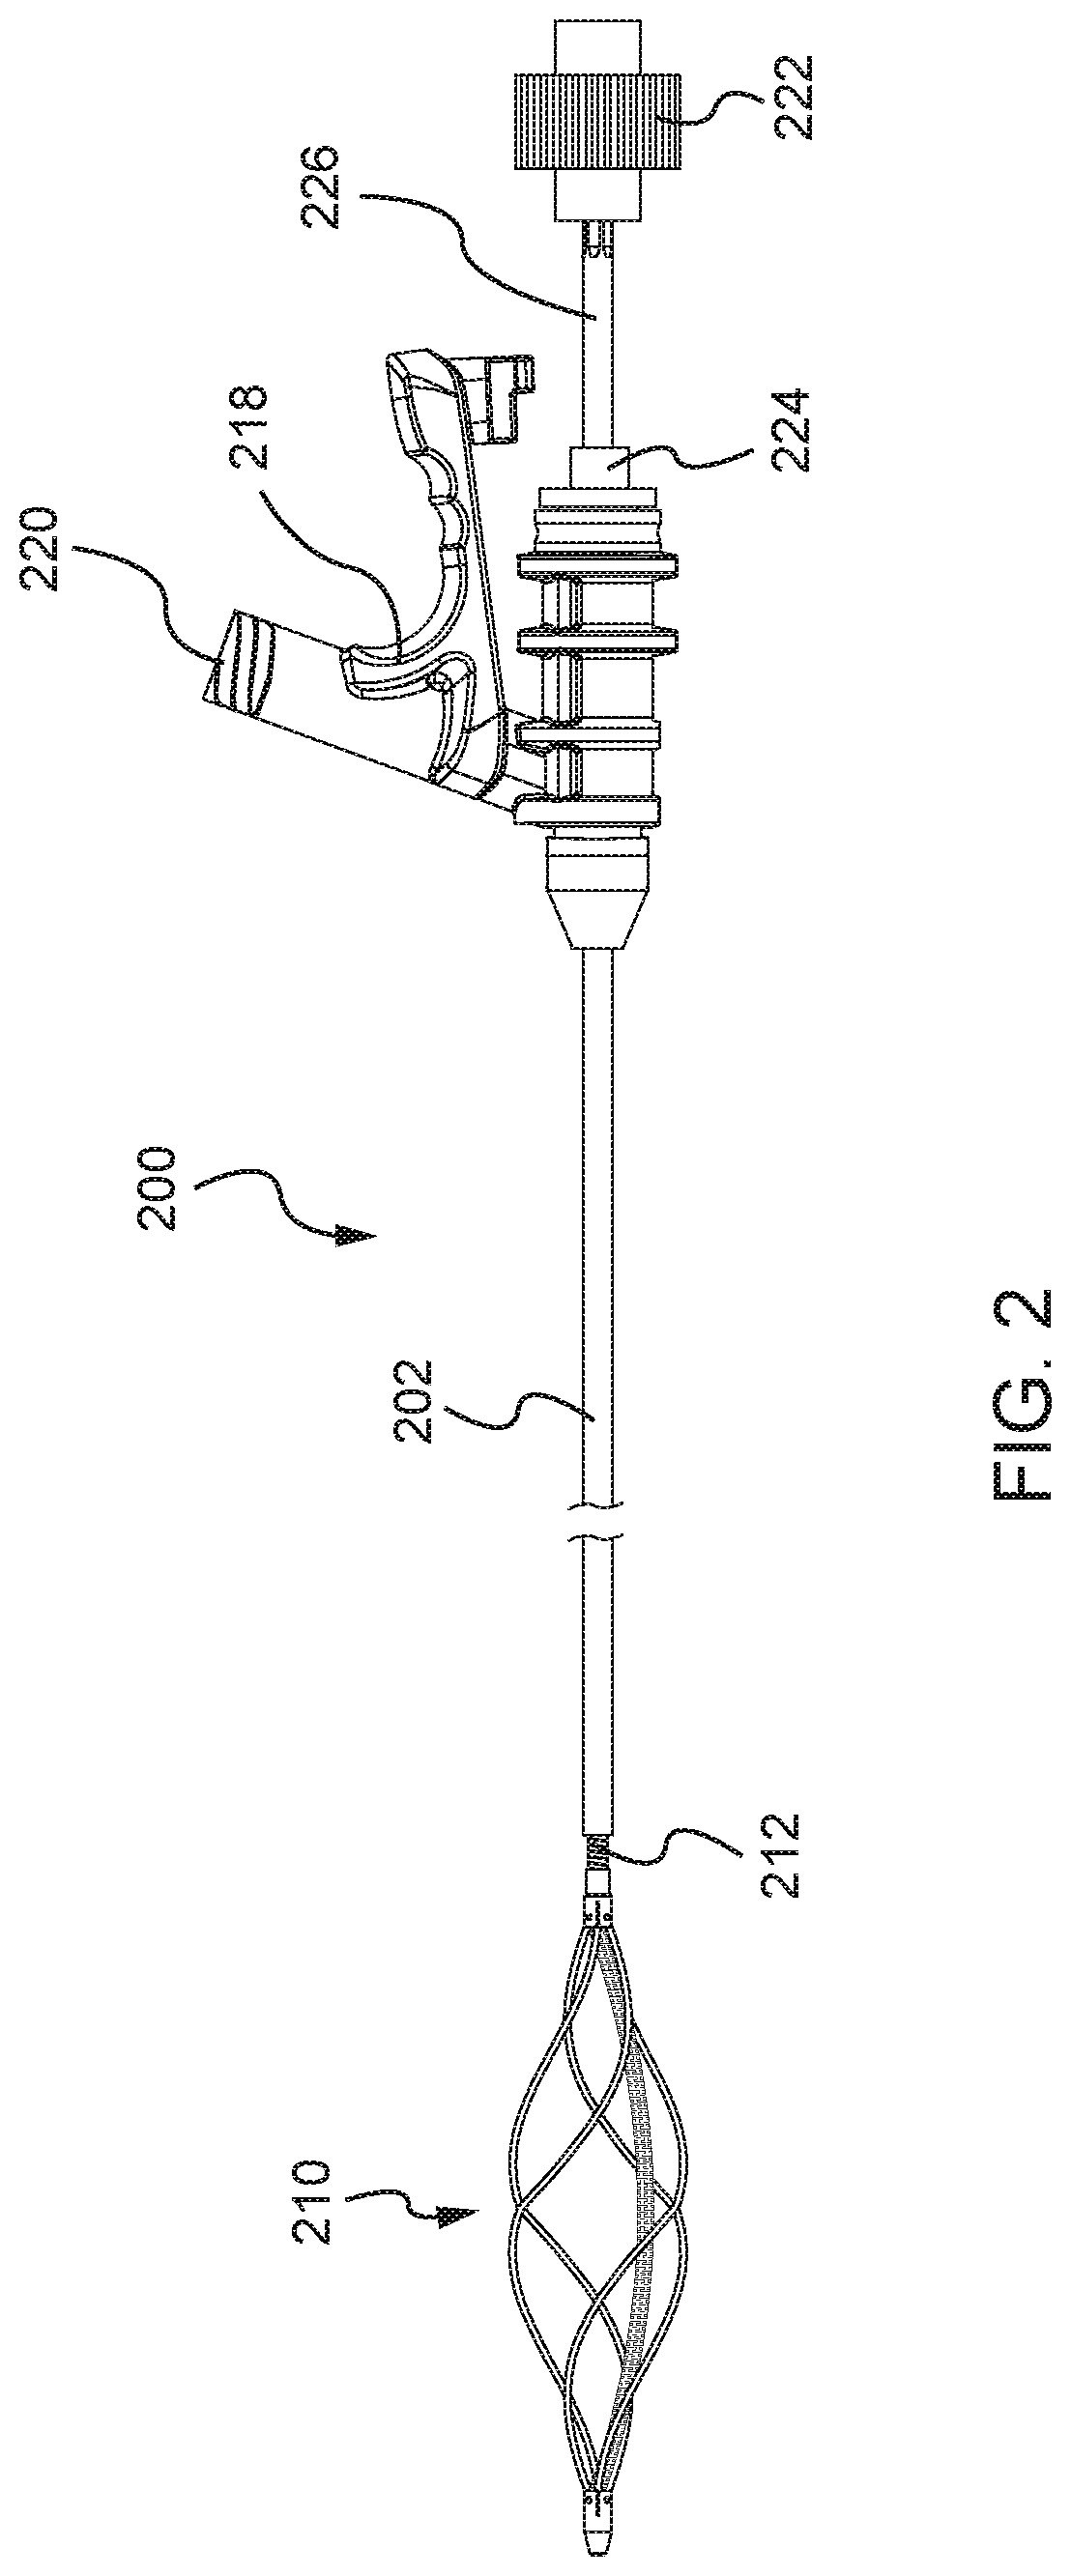 Rotational mechanical thrombectomy device